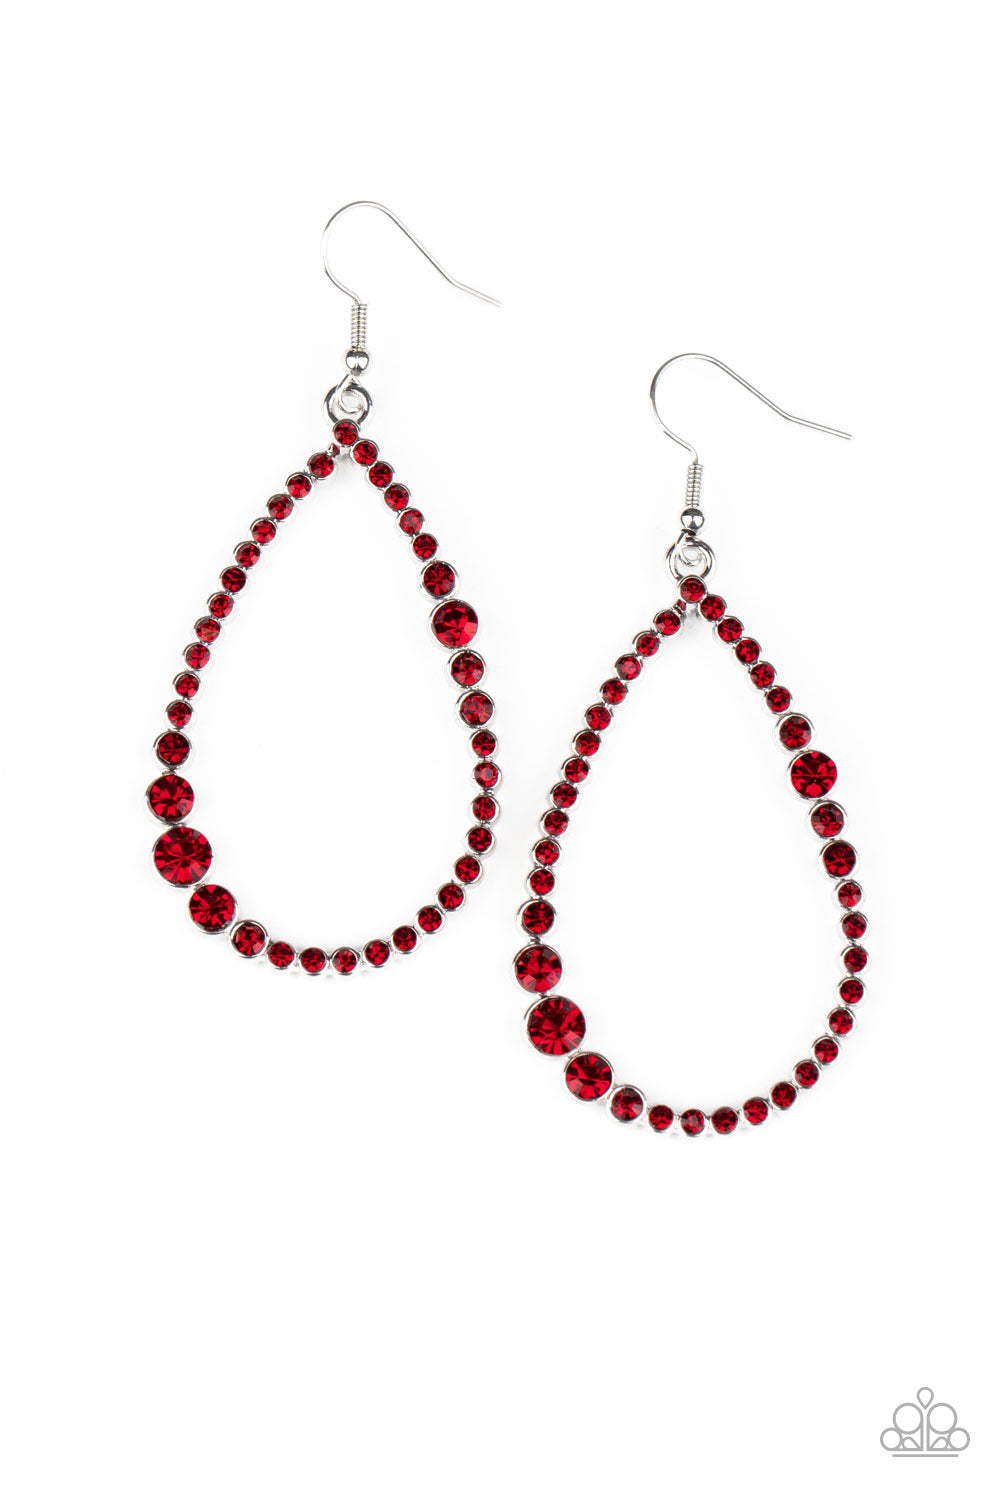 Paparazzi Diva Dimension - Red Earrings